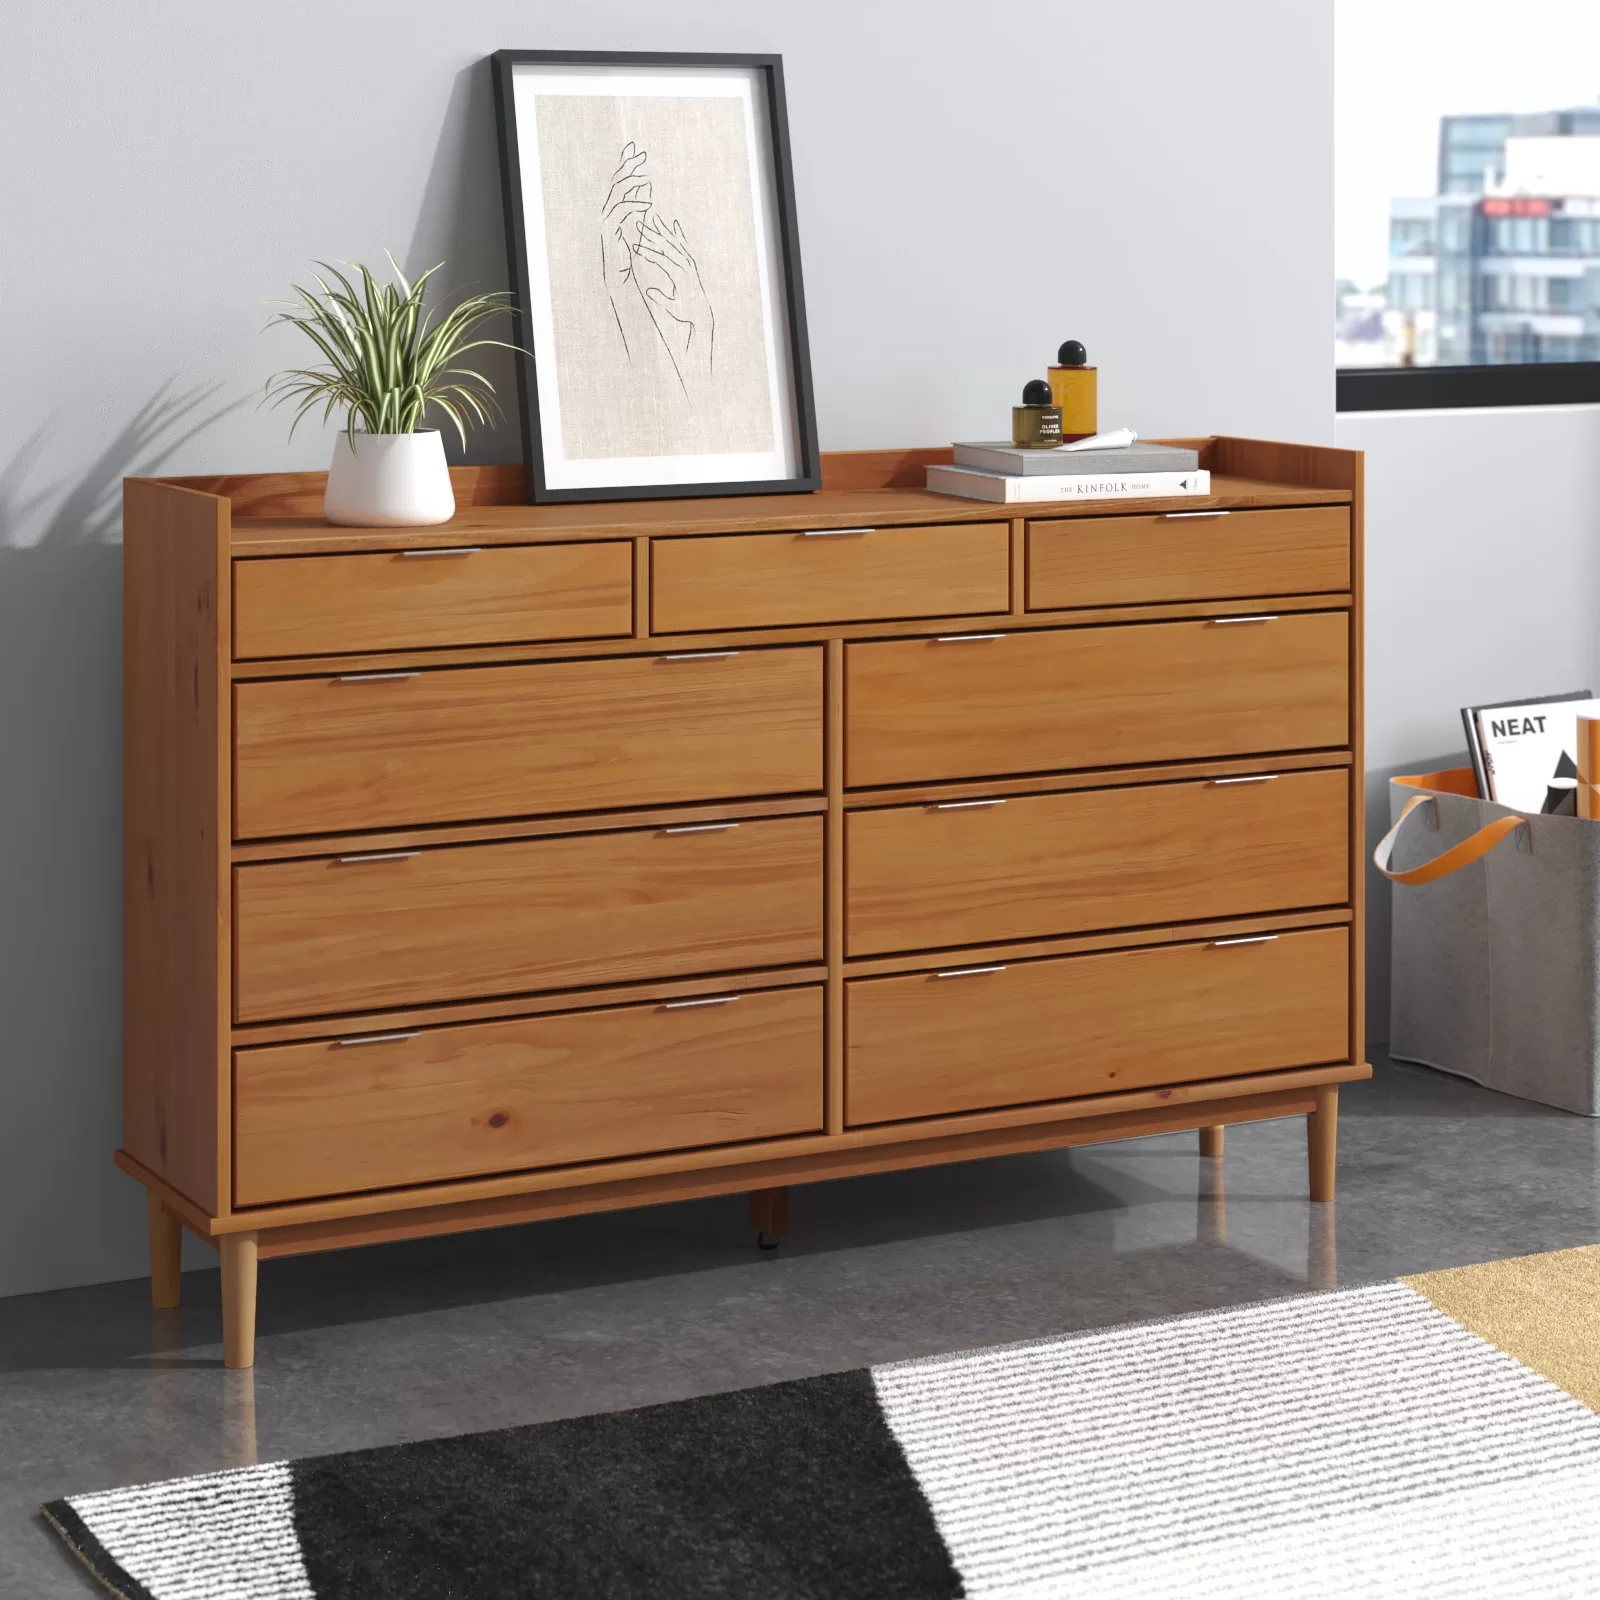 dresser that is great for a small space